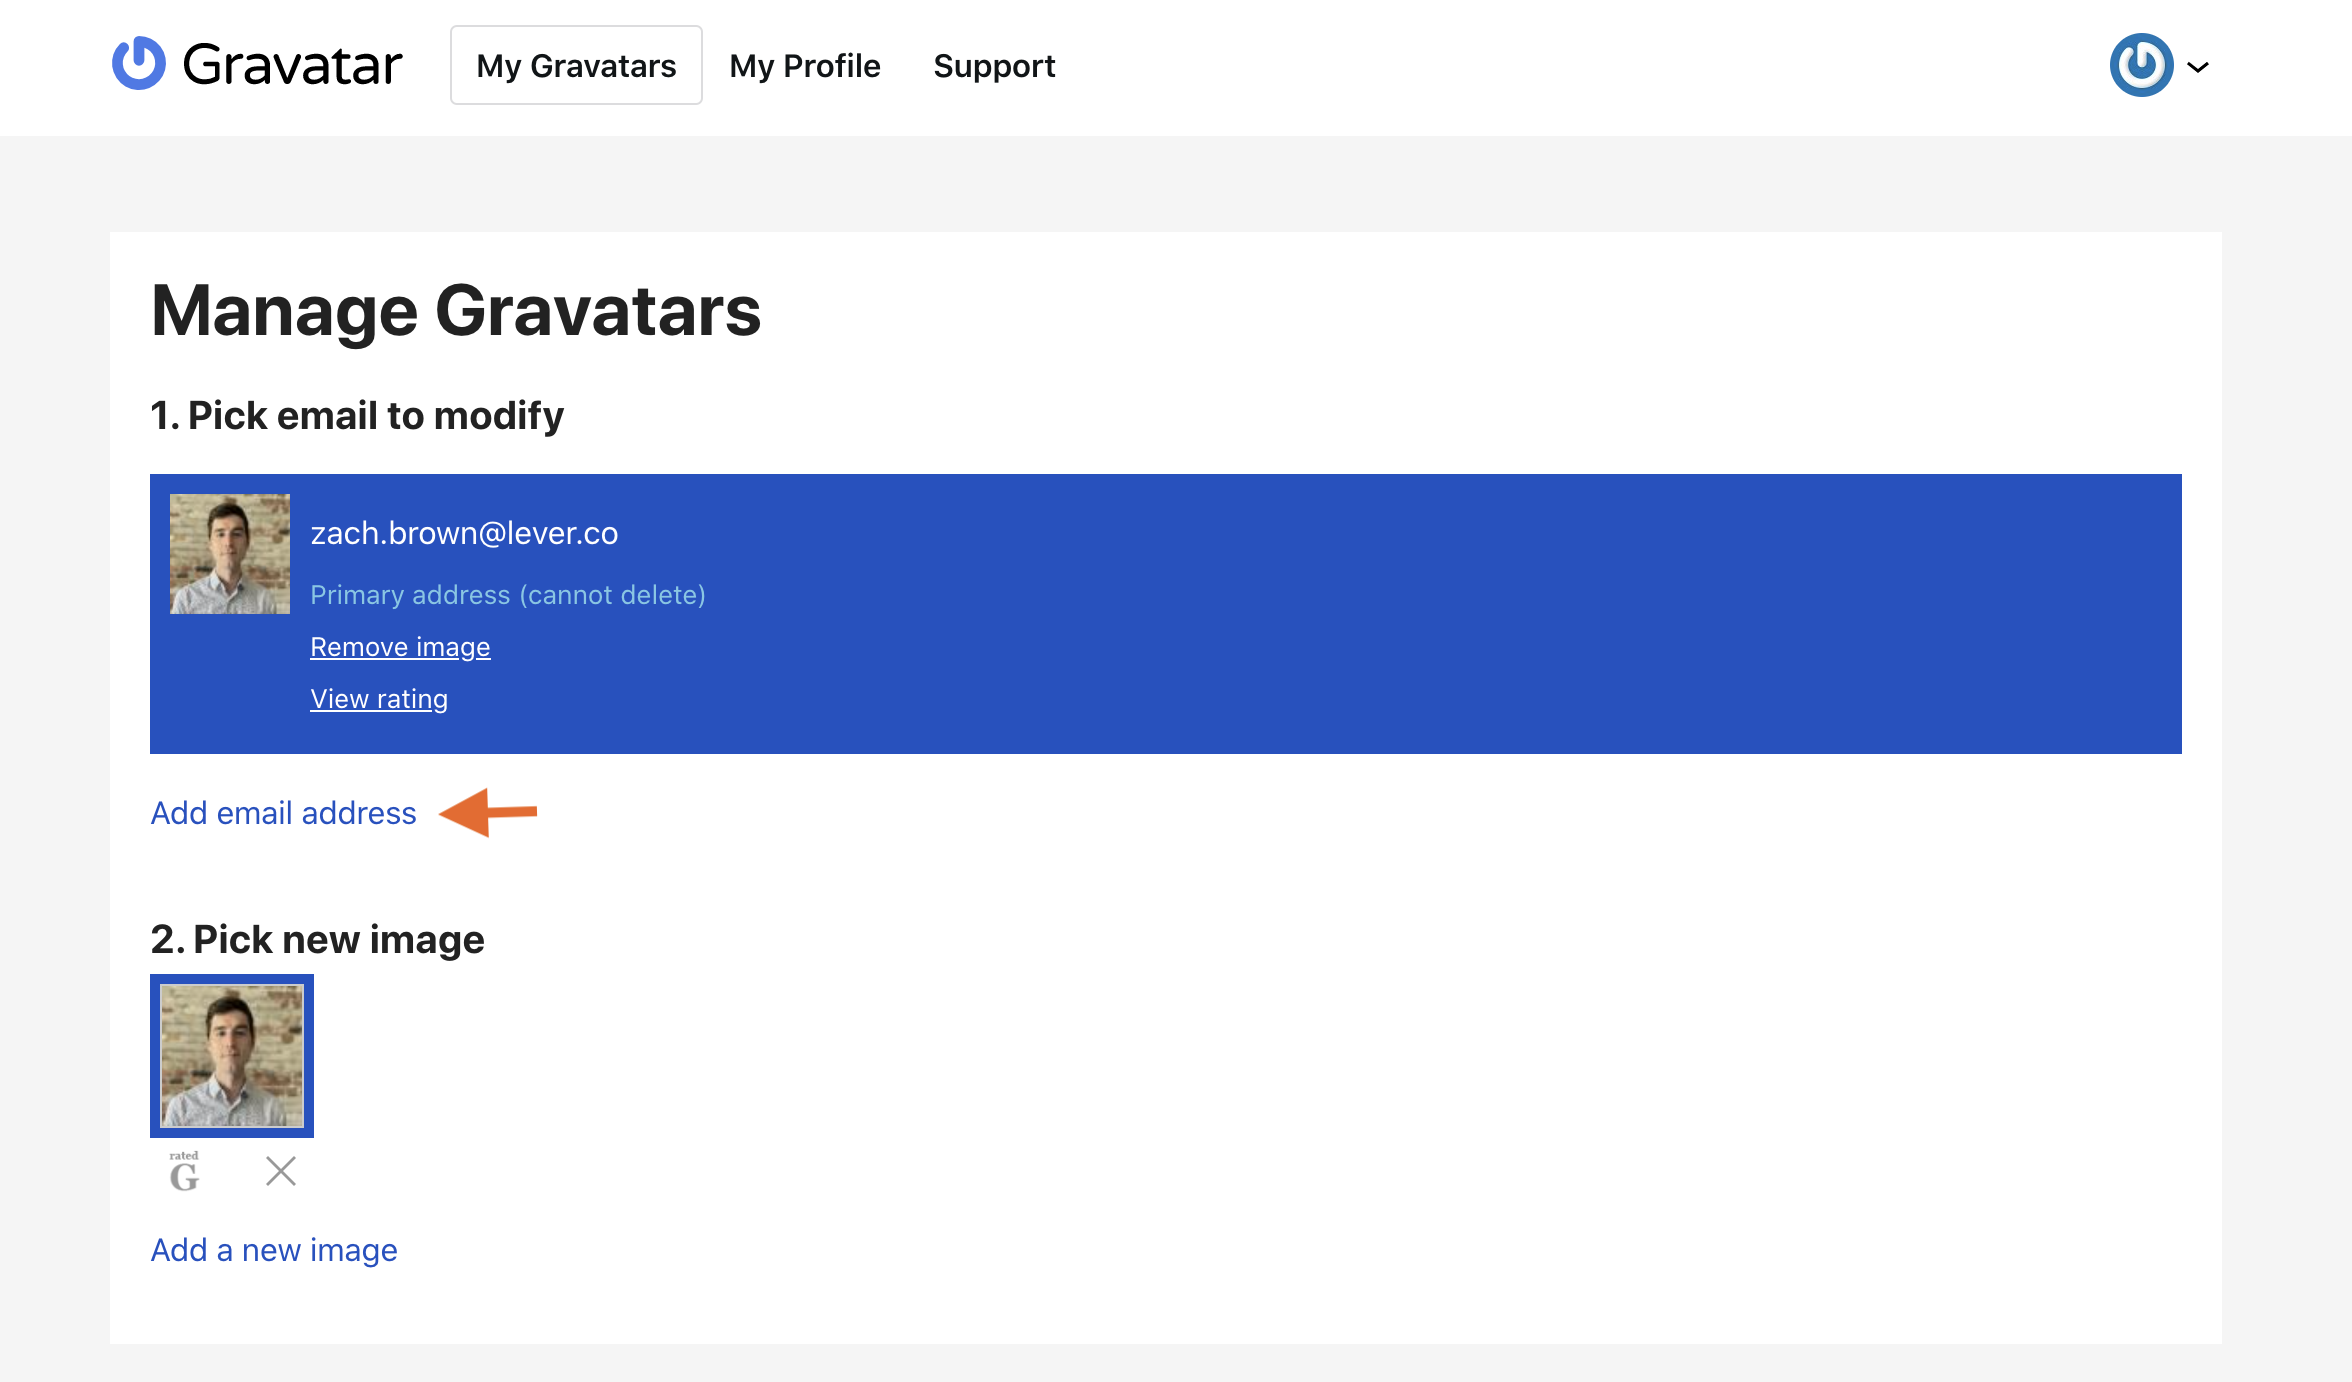 Gravatar profile list with arrow pointing to Add email address link